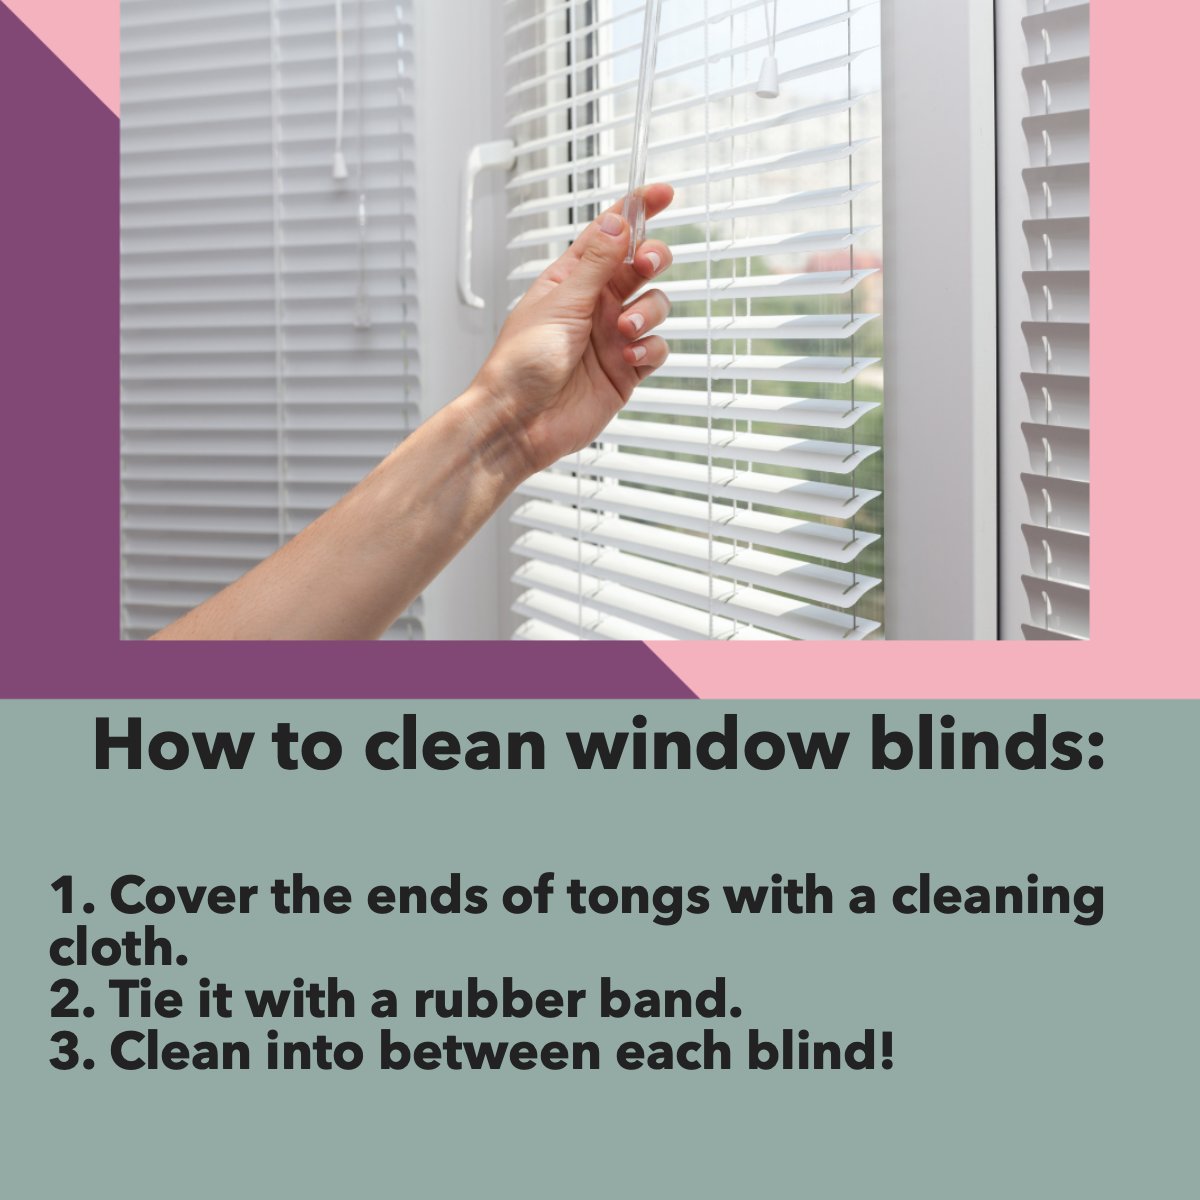 Find 3 click and easy tips to clean your window blinds! ✨ #cleaning #windowblinds #deepcleaning